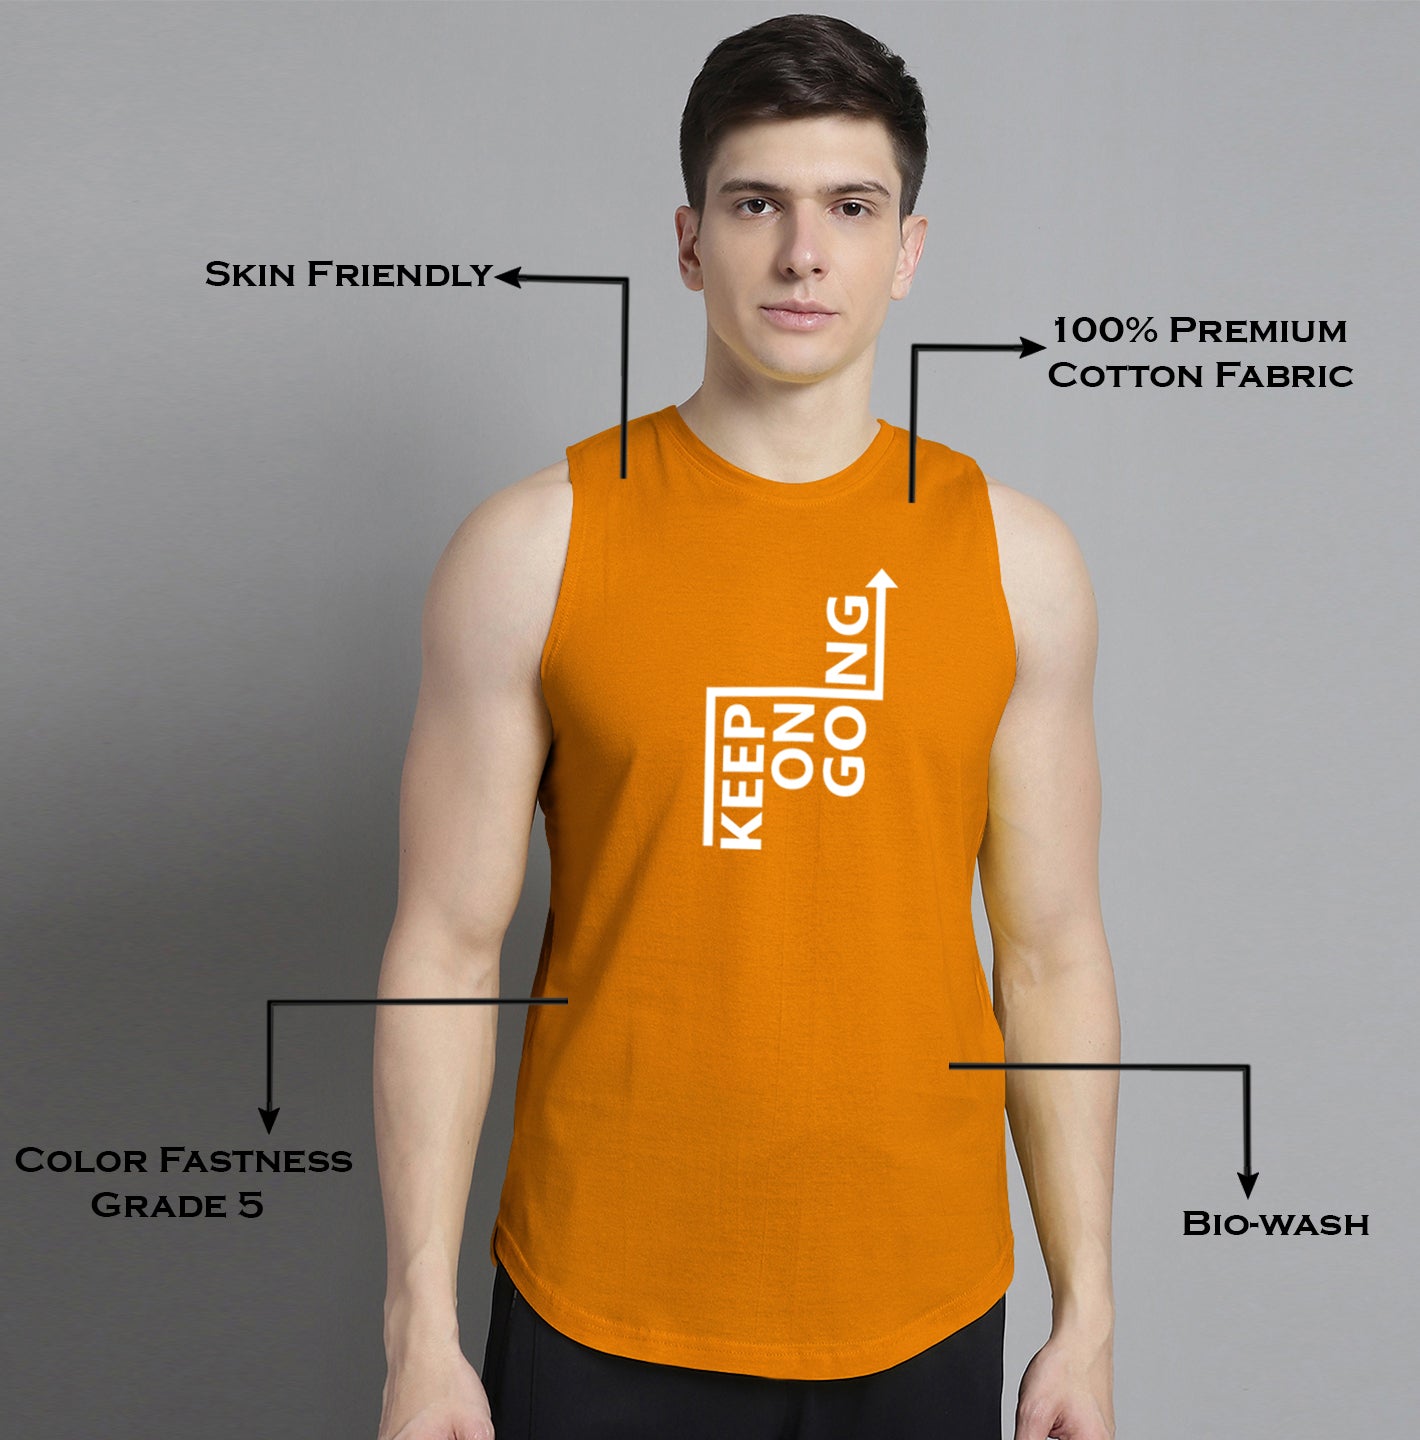 Fbar Keep On Going printed Pure Cotton Training Vest - Friskers